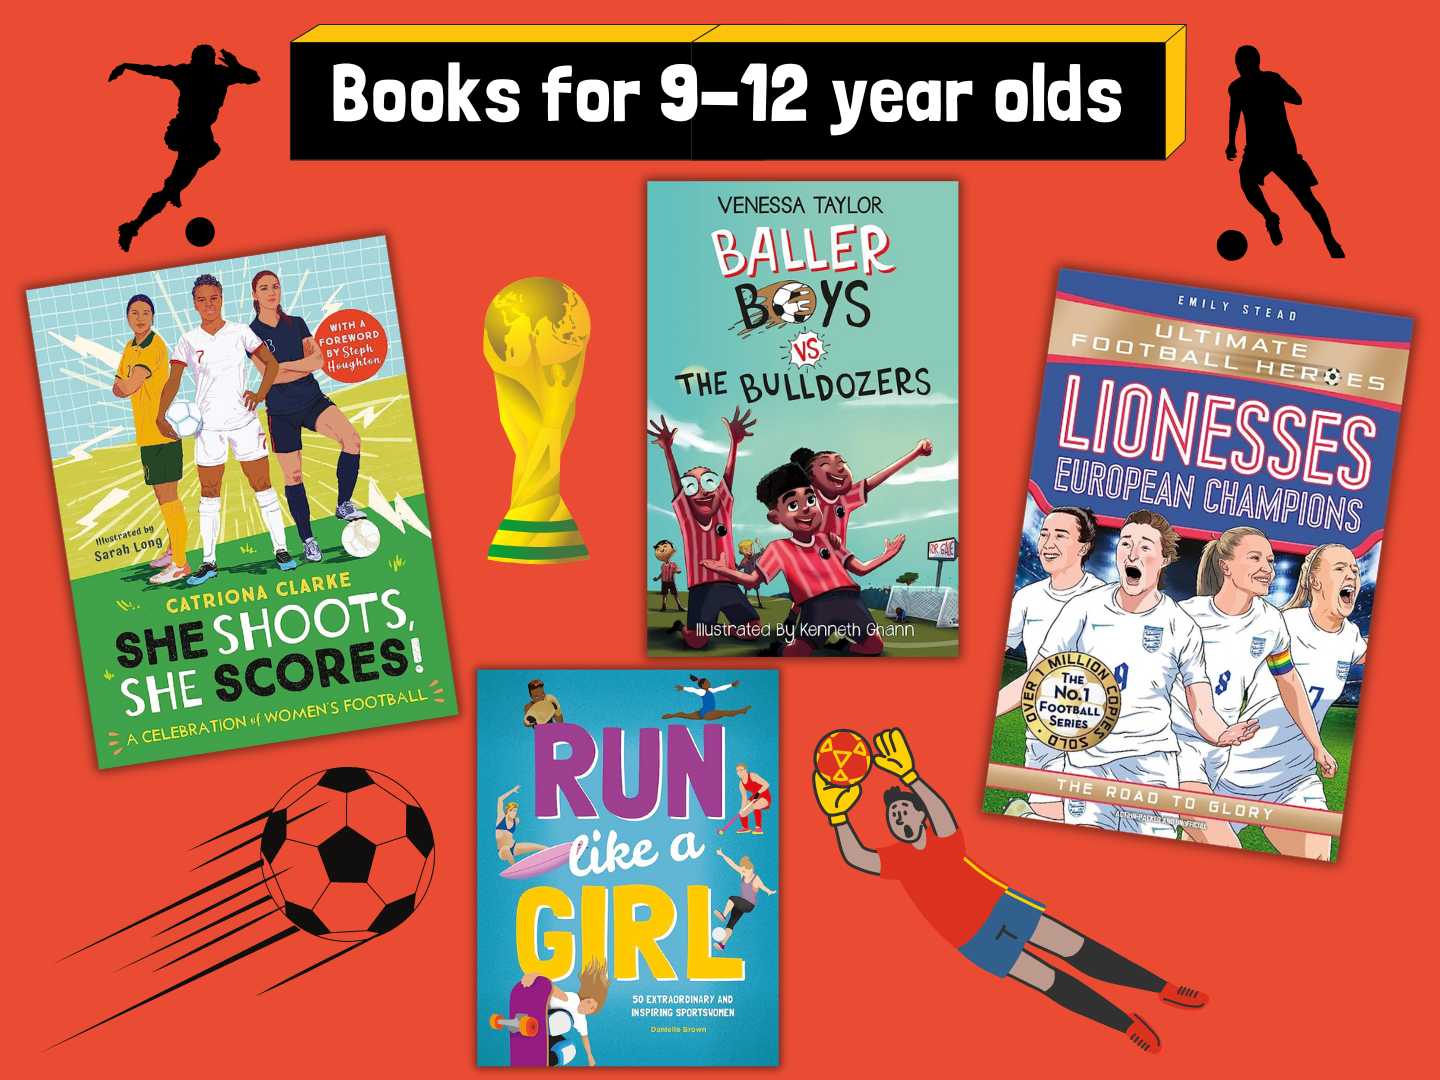 Books for 9-12 year olds